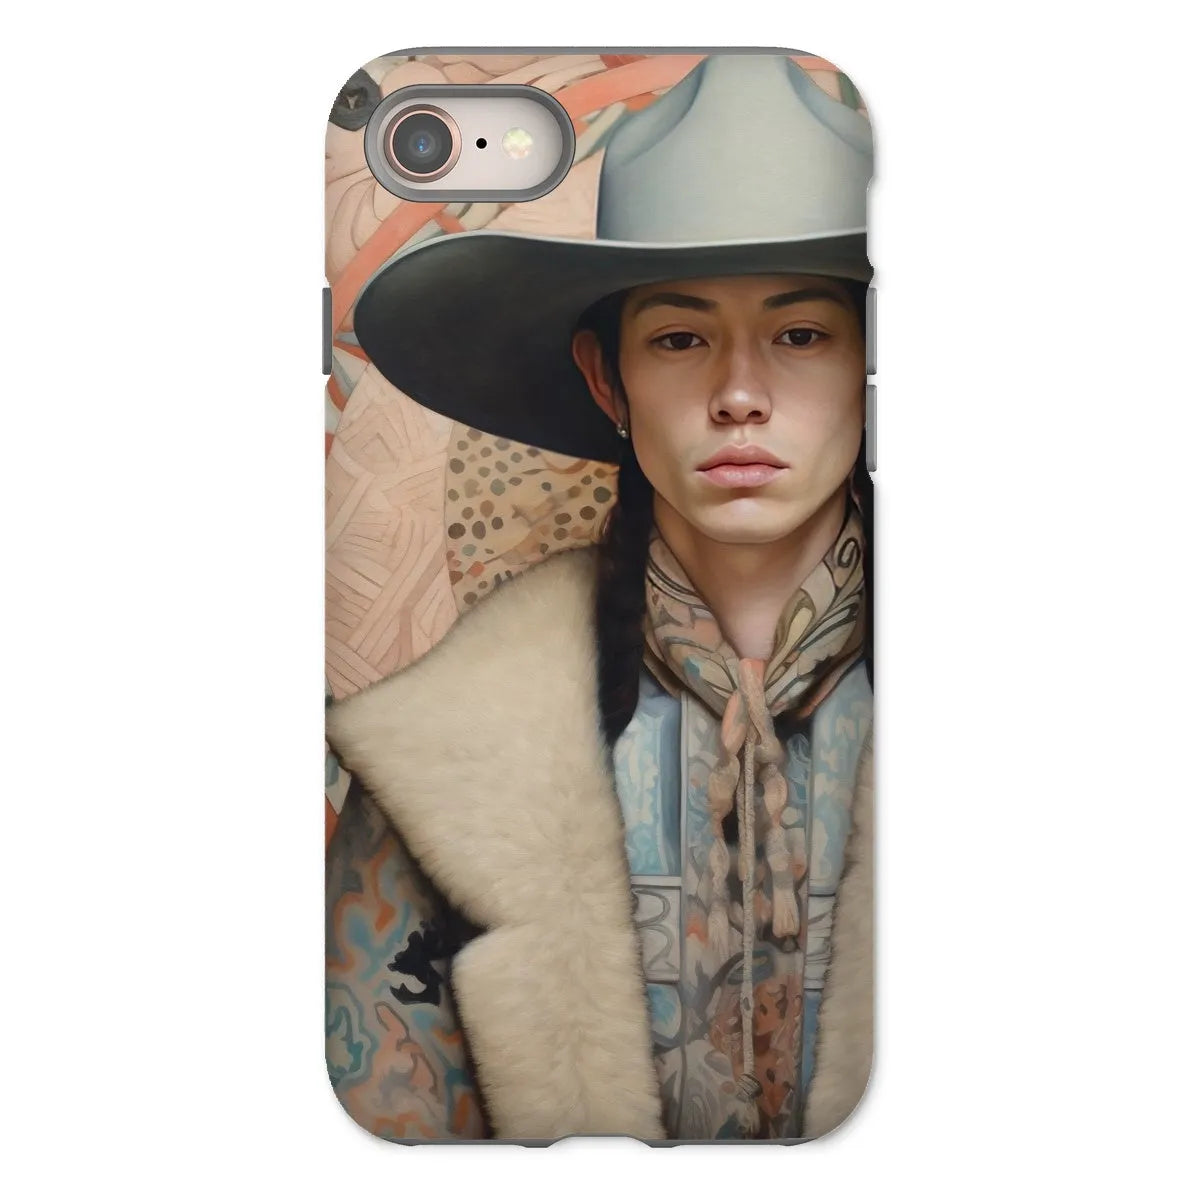 Jacy The Gay Cowboy - Dandy Gay Aesthetic Art Phone Case - Iphone 8 / Matte - Mobile Phone Cases - Aesthetic Art